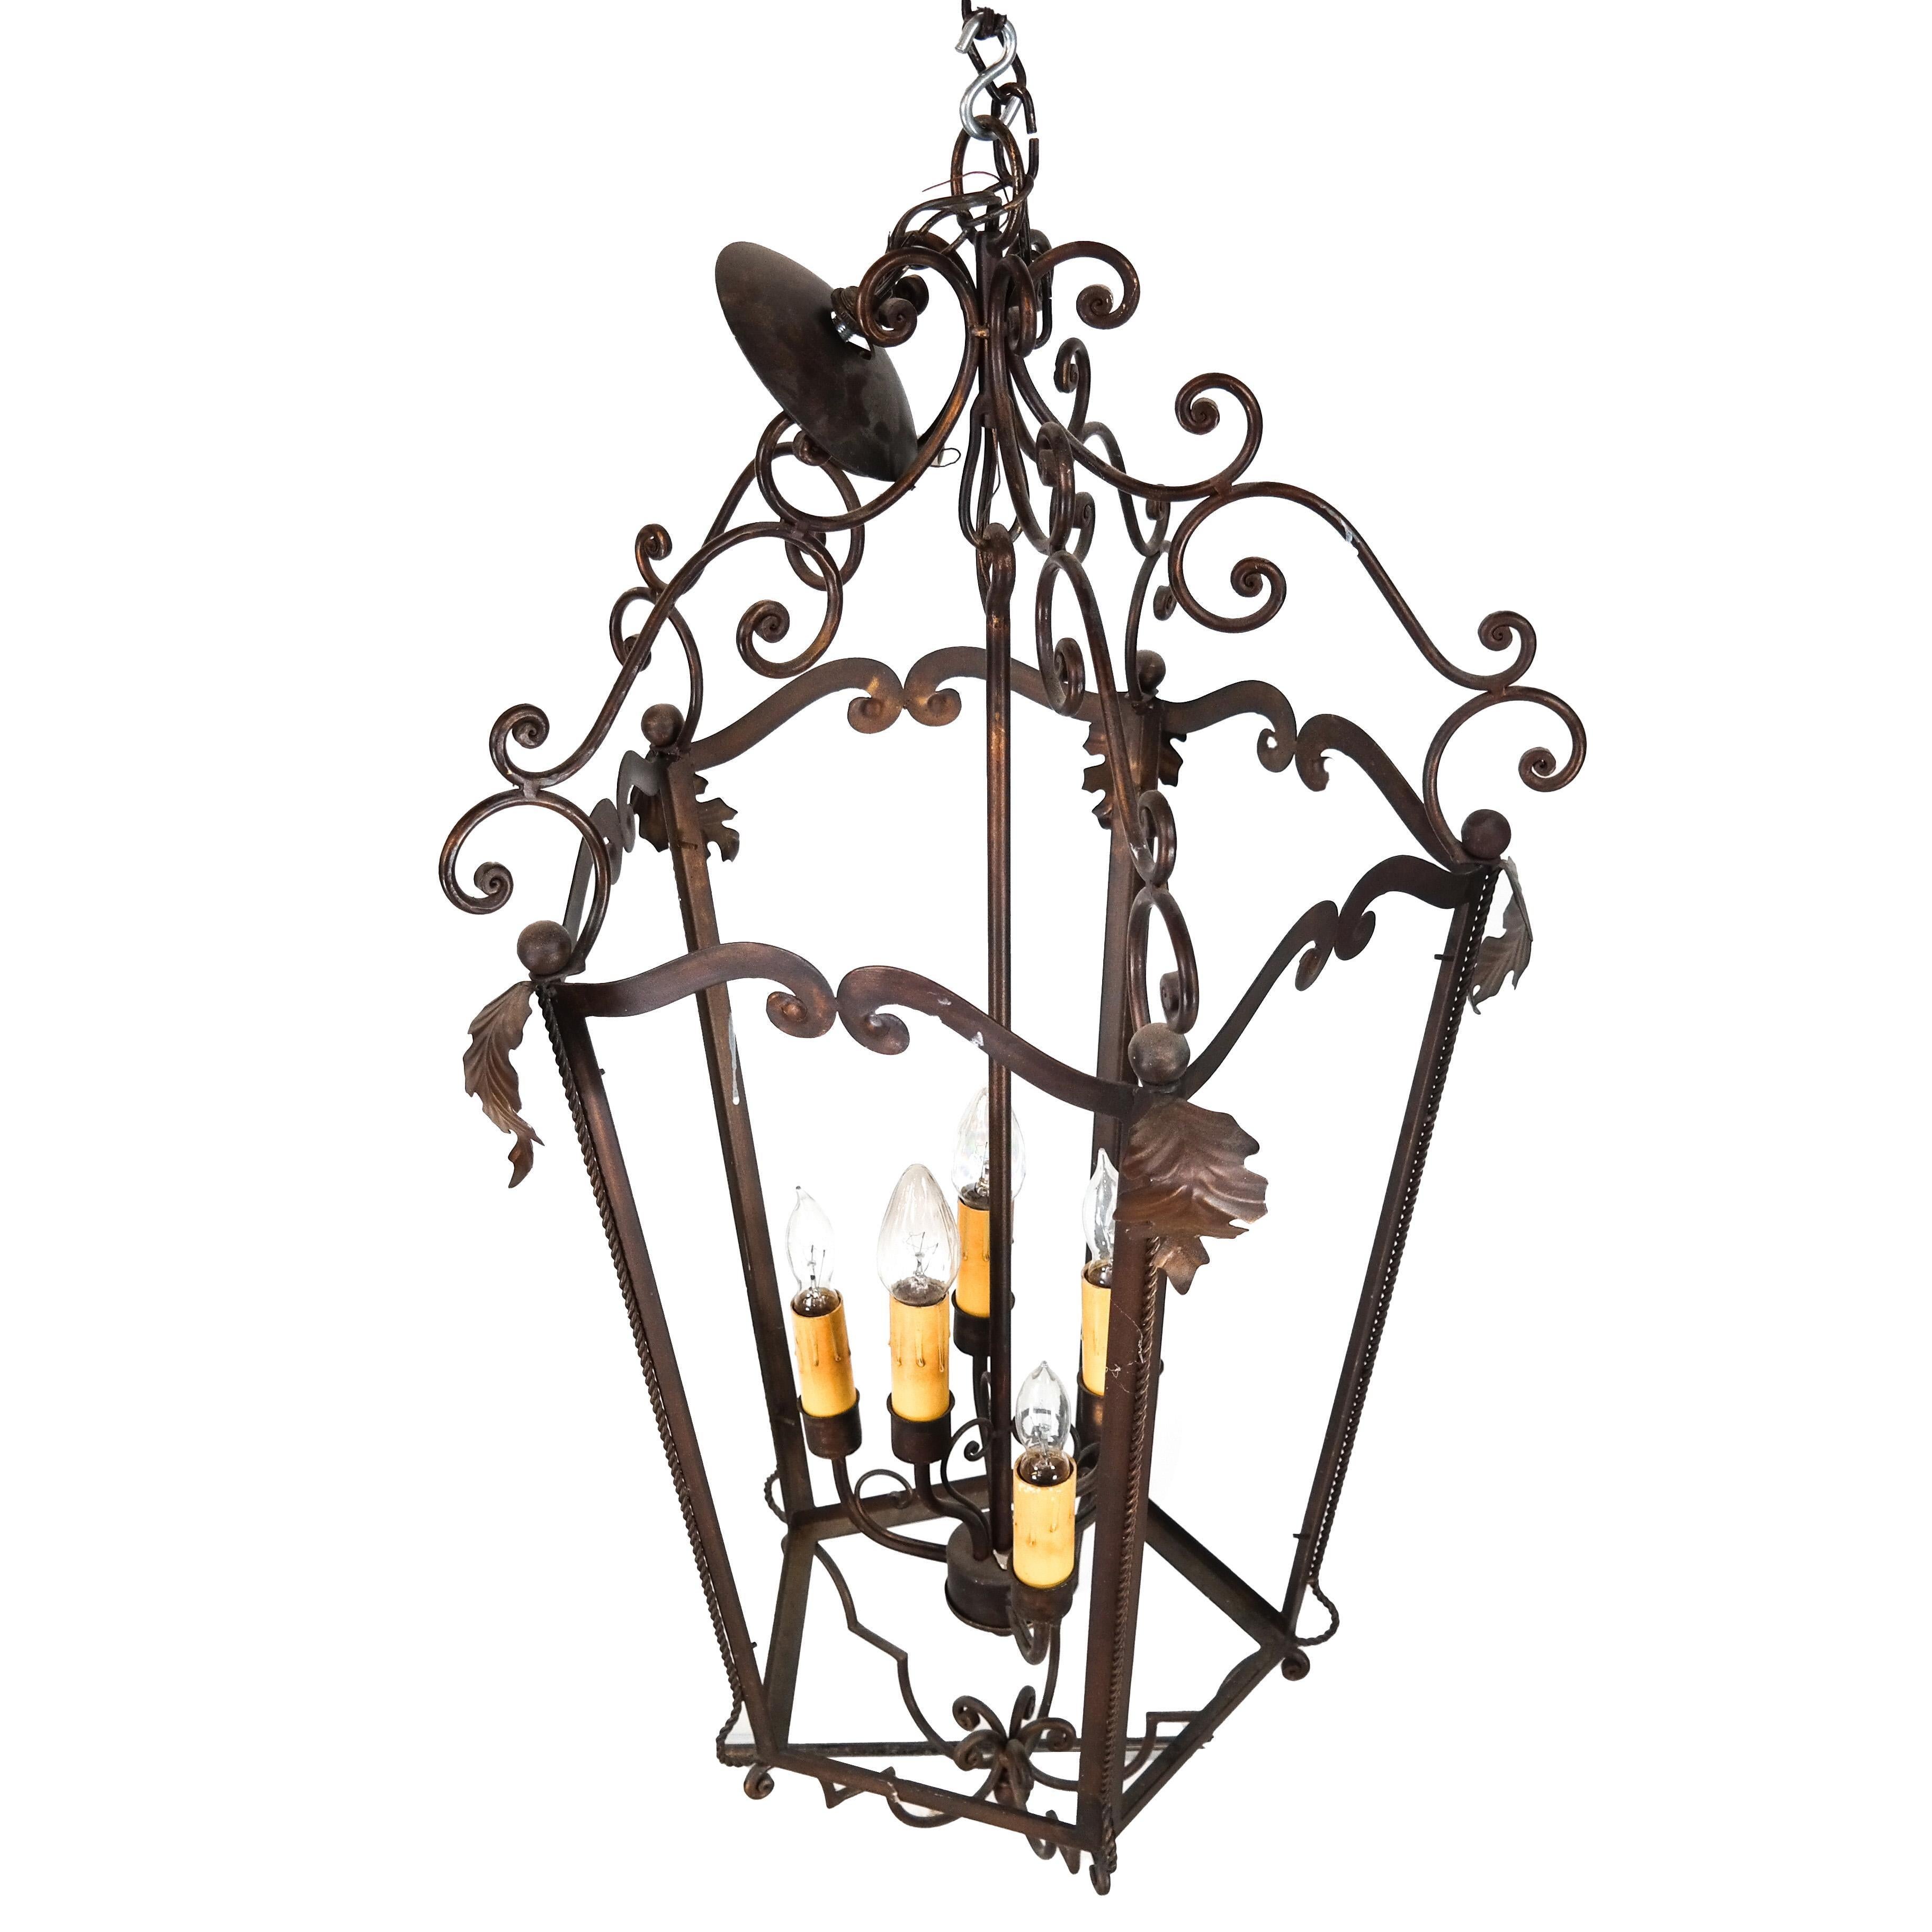 Rustic European style large hanging lantern with leaf motif and curved scrollwork detail.